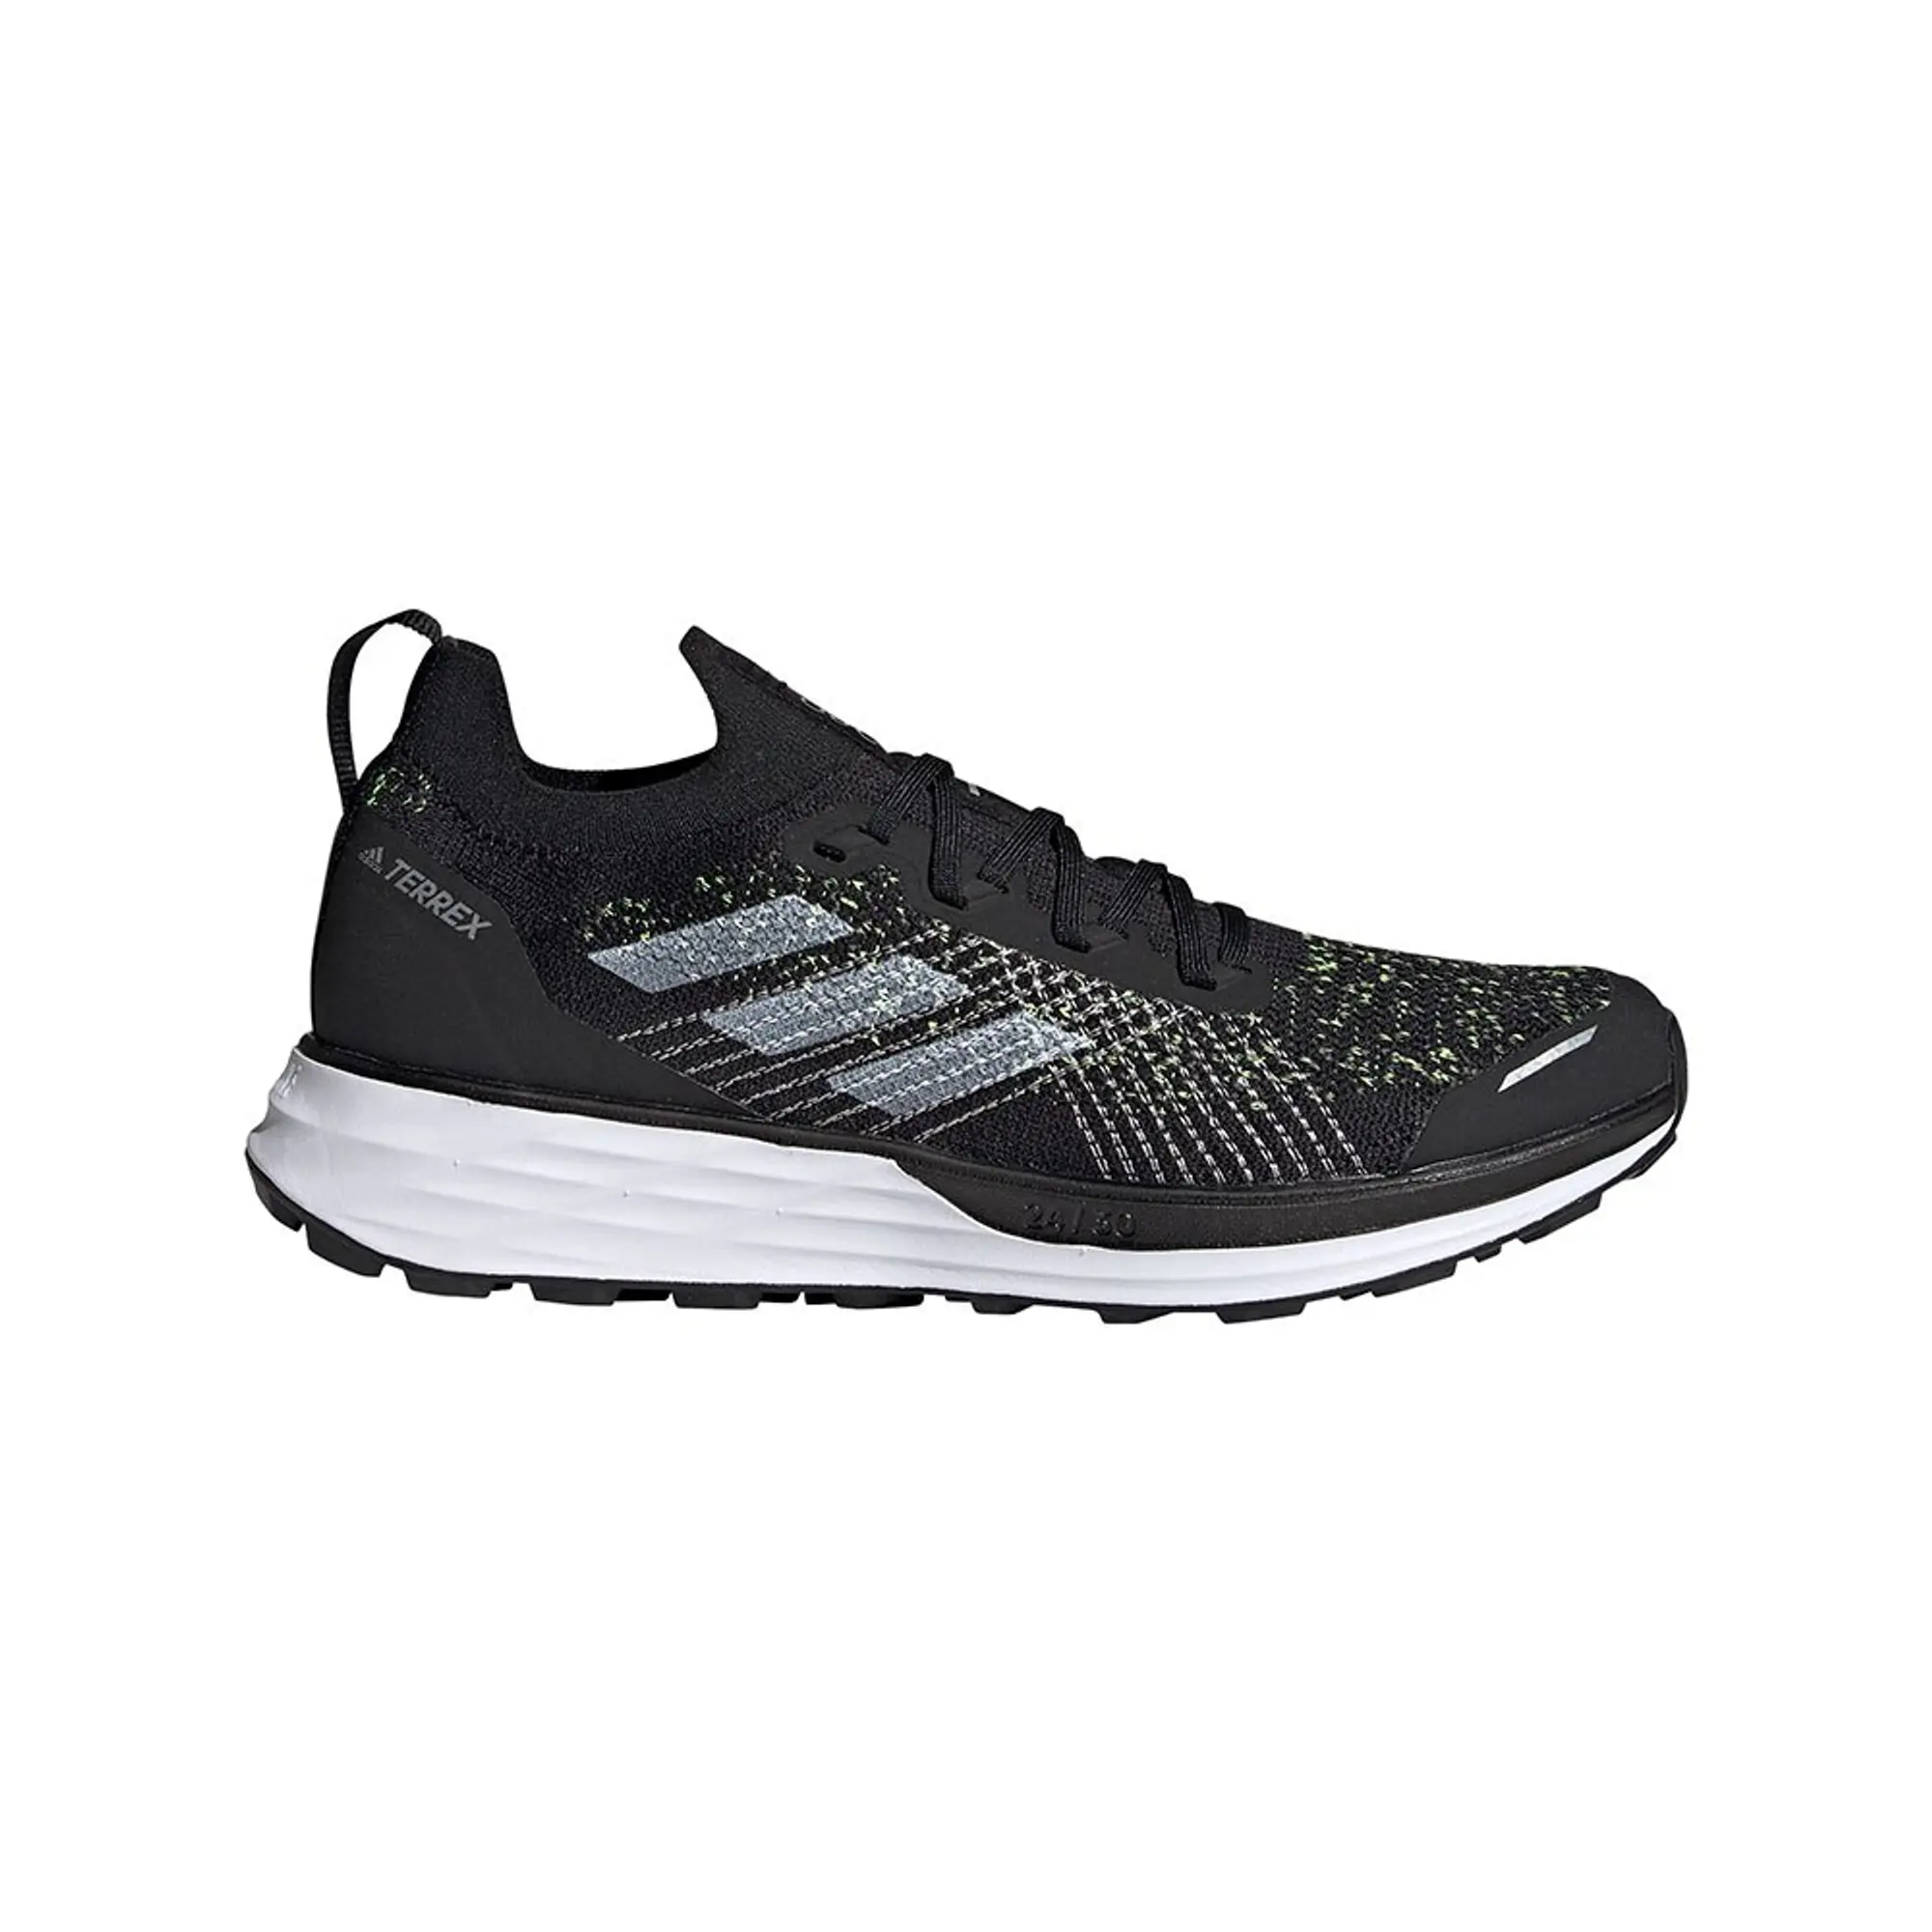 adidas Terrex Two Primeblue Trail Running Shoes